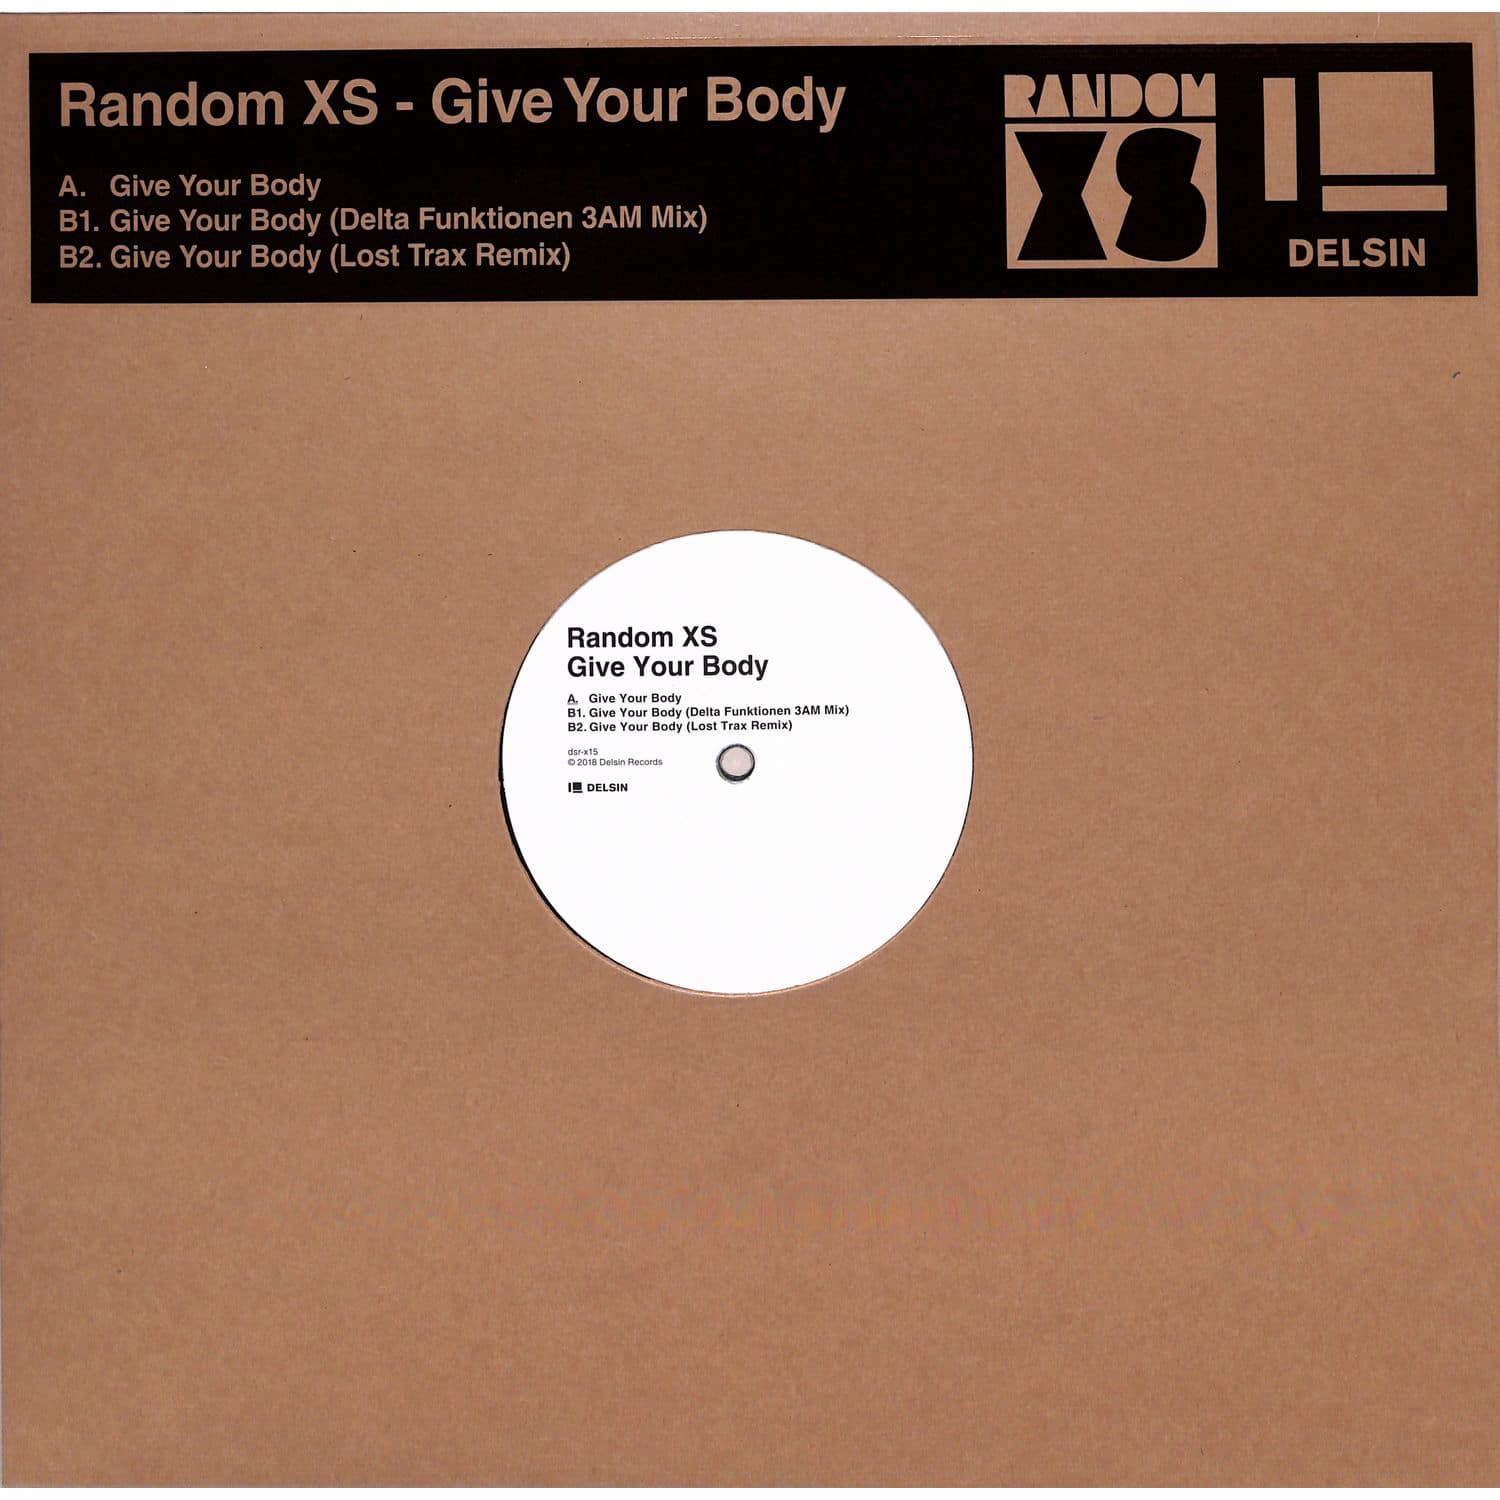 Random XS - GIVE YOUR BODY